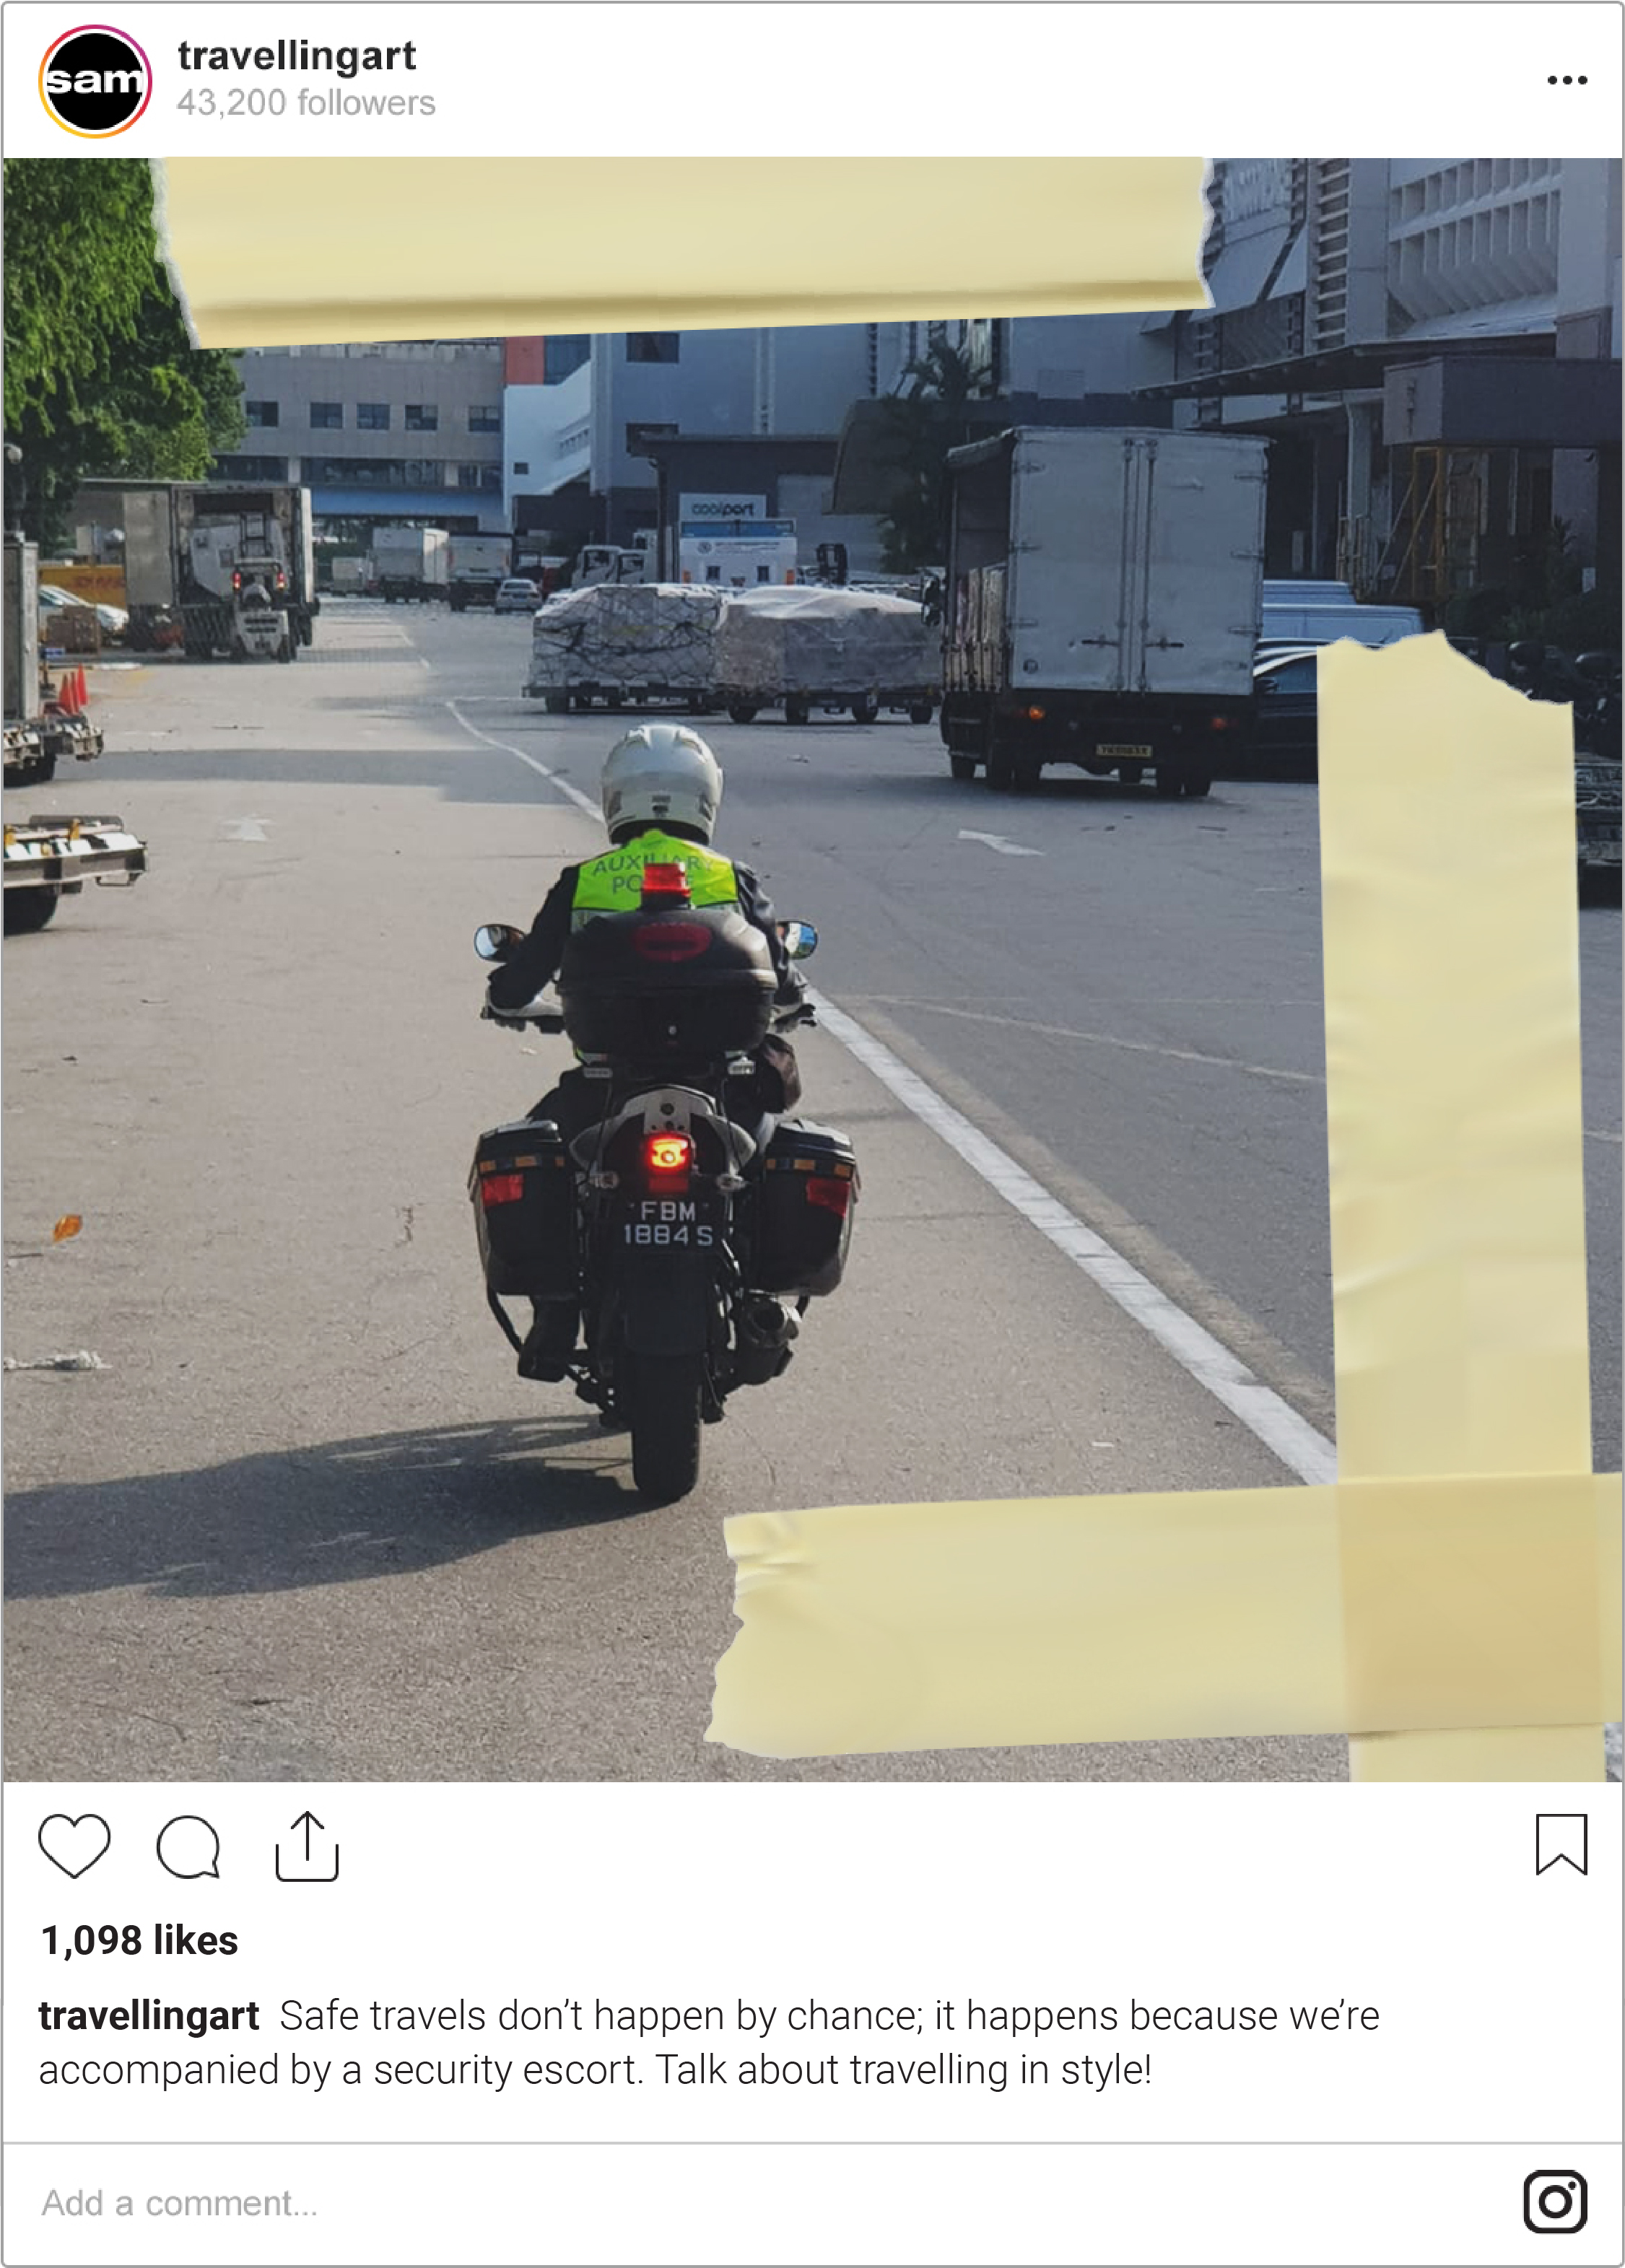 A back view of a security officer riding a motorbike to escort the truck carrying the artworks.